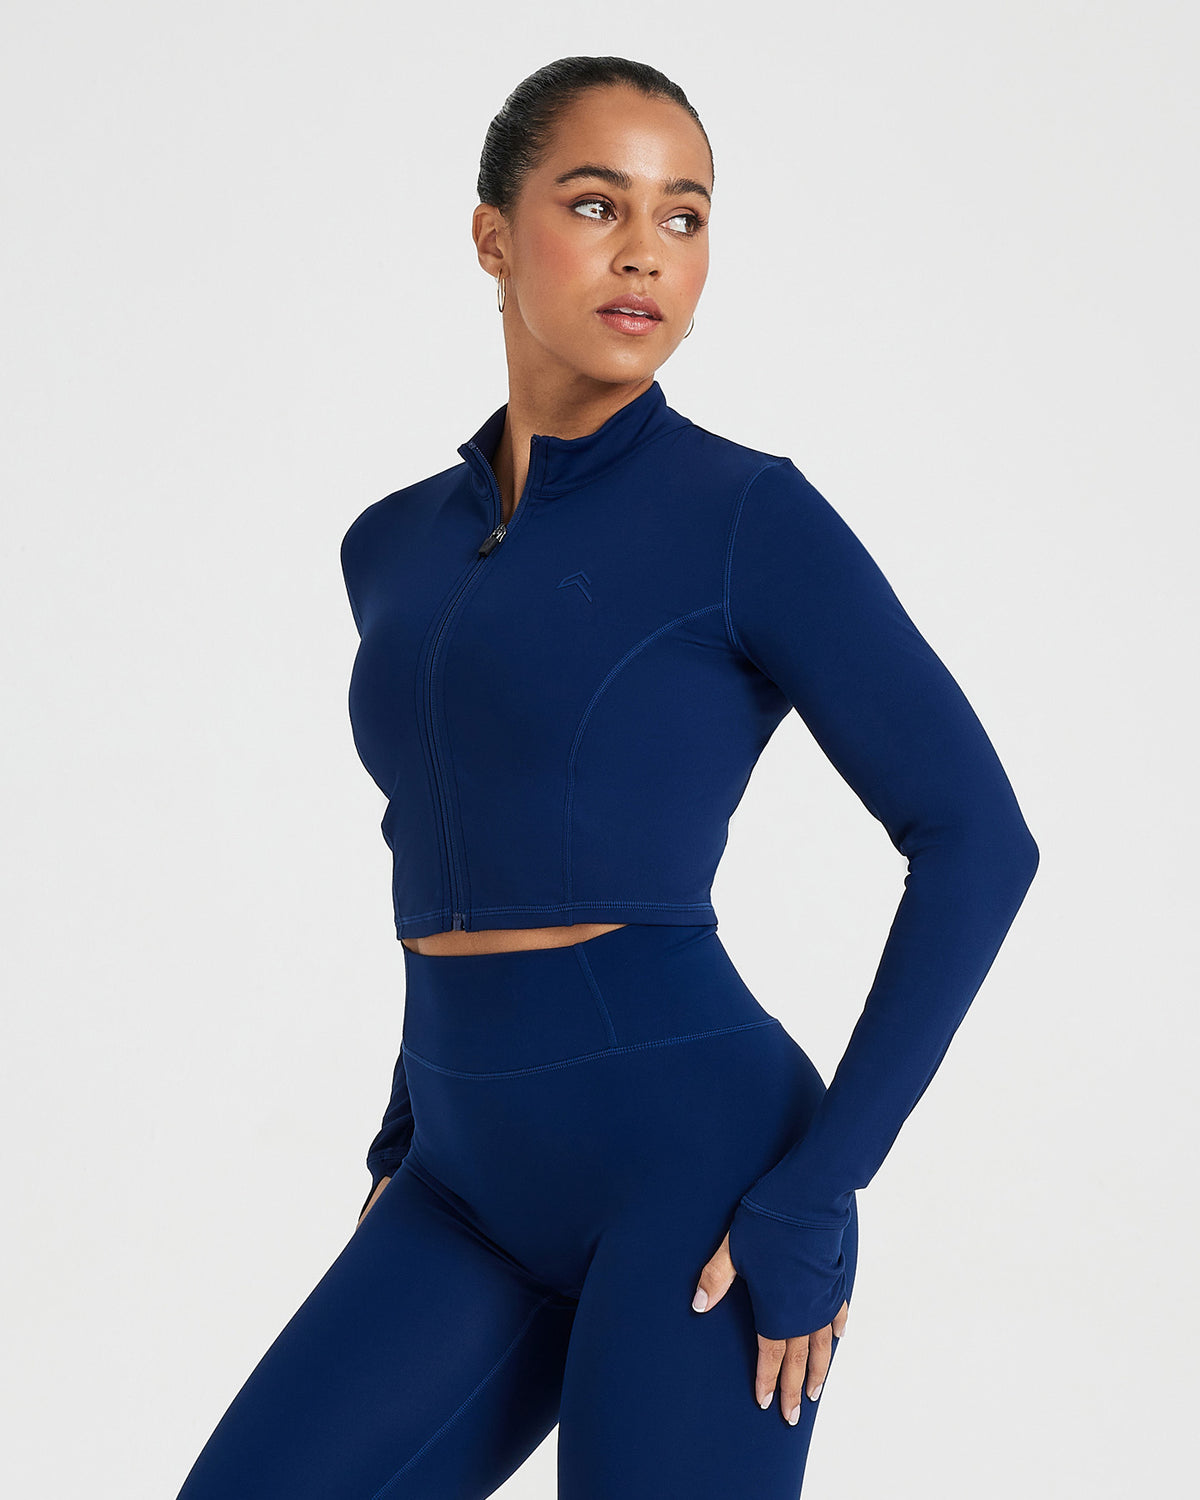 Blue Cropped Jacket Women's - Midnight | Oner Active